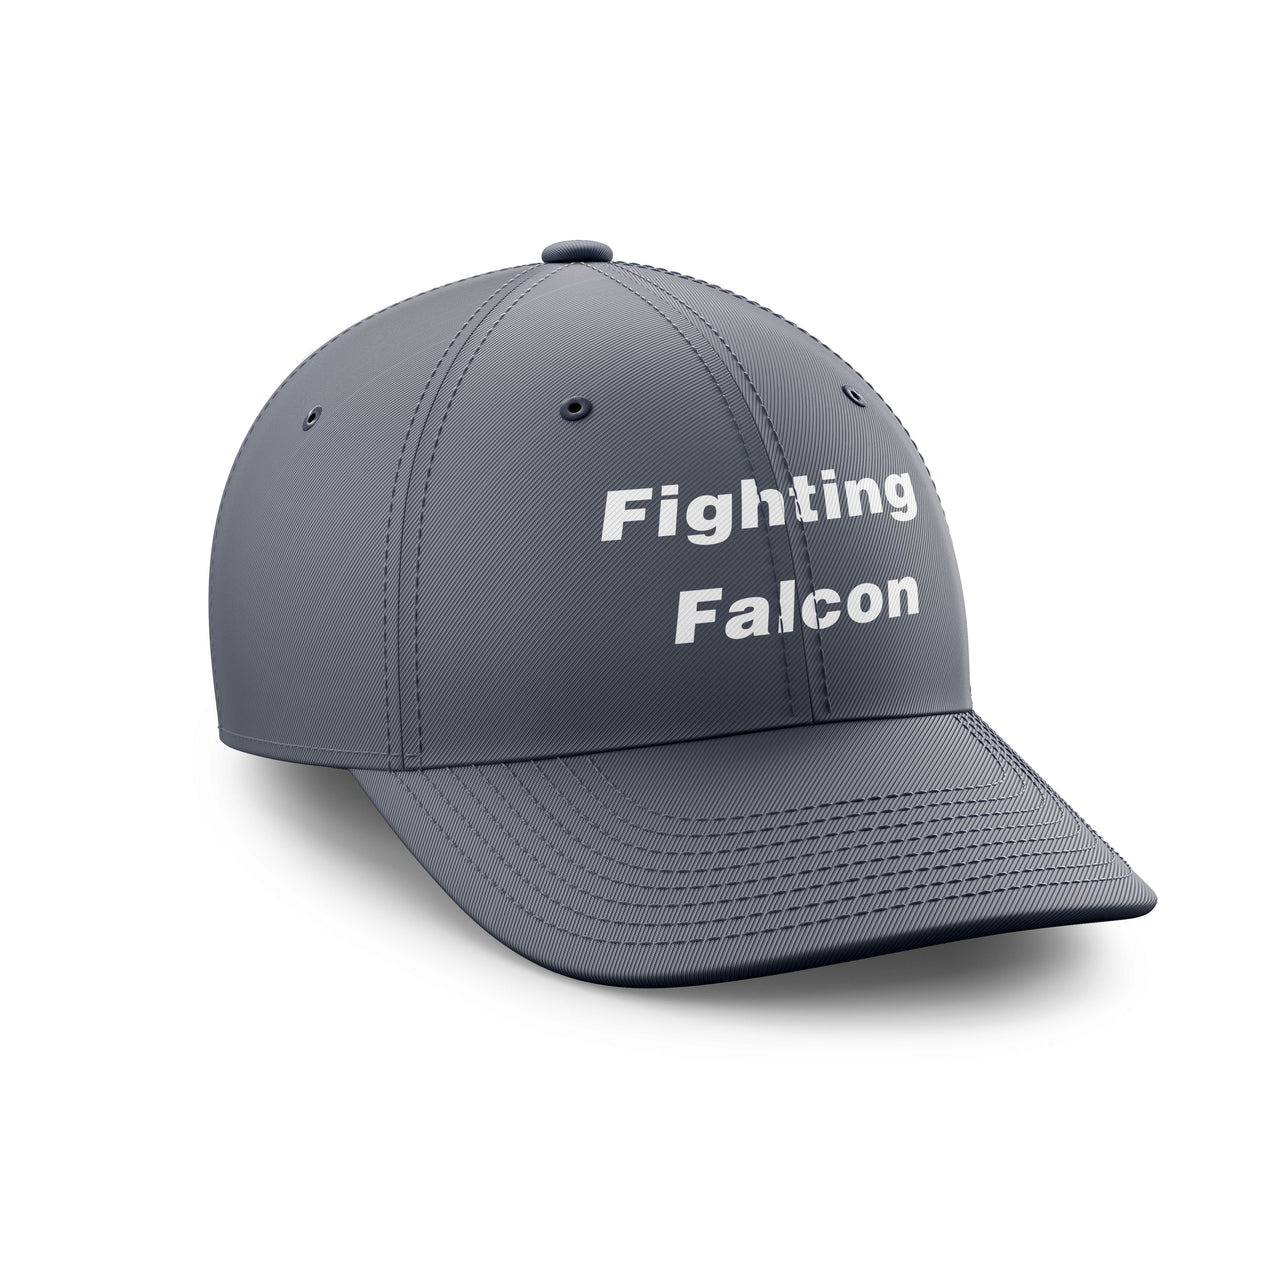 Fighting Falcon & Text Designed Embroidered Hats